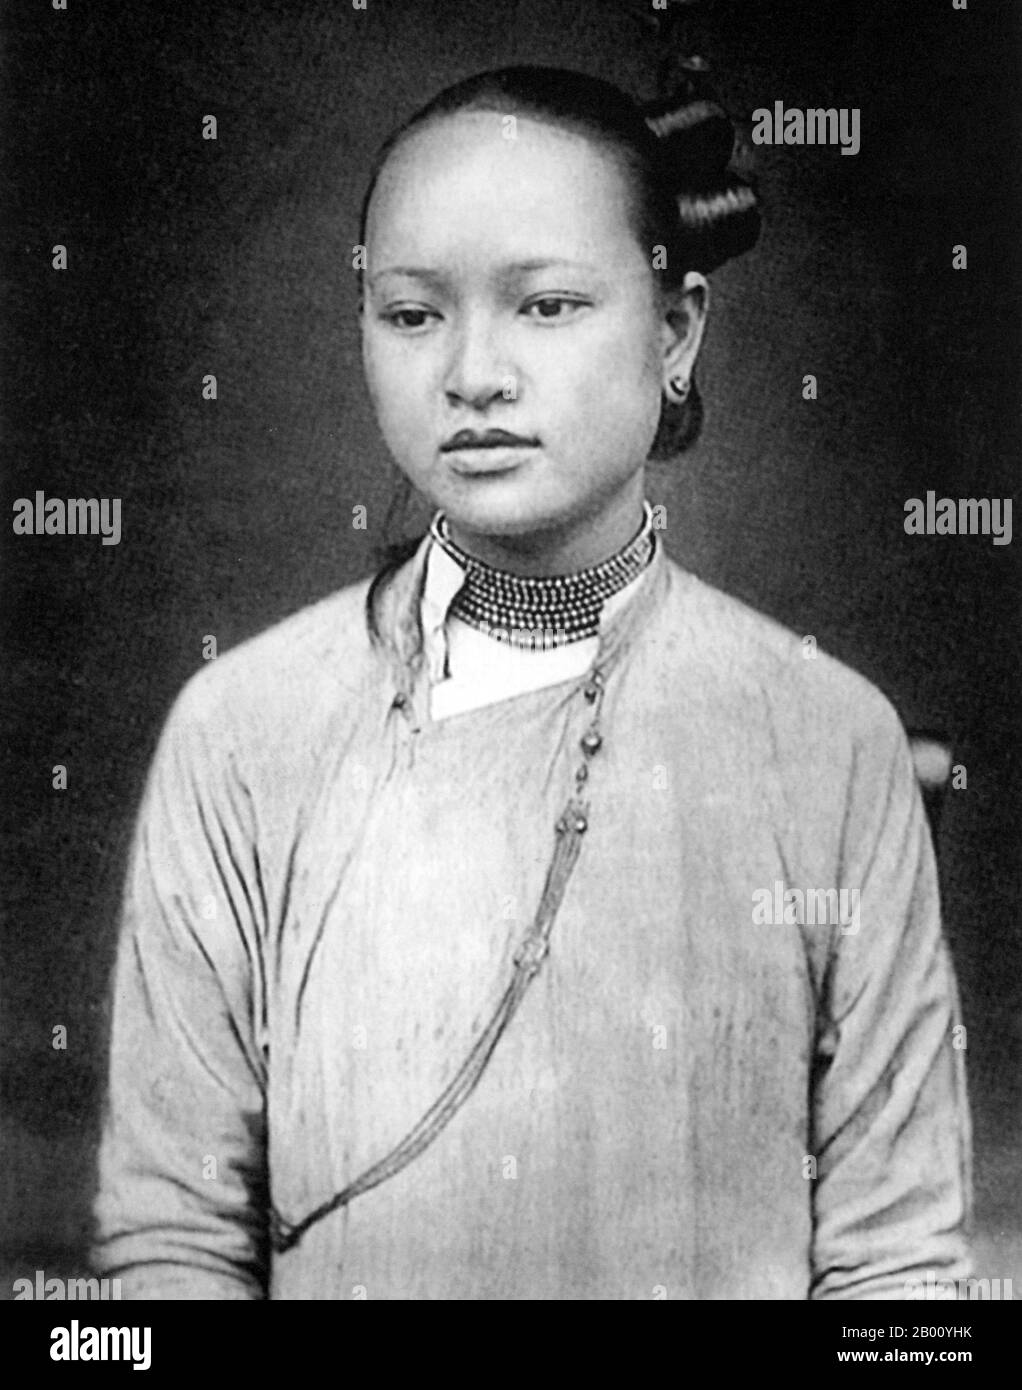 Vietnam: Woman of Saigon (early 20th century).  Vietnam's independence was gradually eroded by France in a series of military conquests from 1859 until 1885 when the entire country became part of French Indochina. Significant political and cultural changes were placed on the Vietnamese people, including the propagation of Roman Catholicism. When Emperor Thanh Thai, who was opposed to French colonial rule, was exiled in 1907, the French decided to pass the throne to his son who was only seven years old, because they thought someone so young would be easily influenced and controlled. Stock Photo